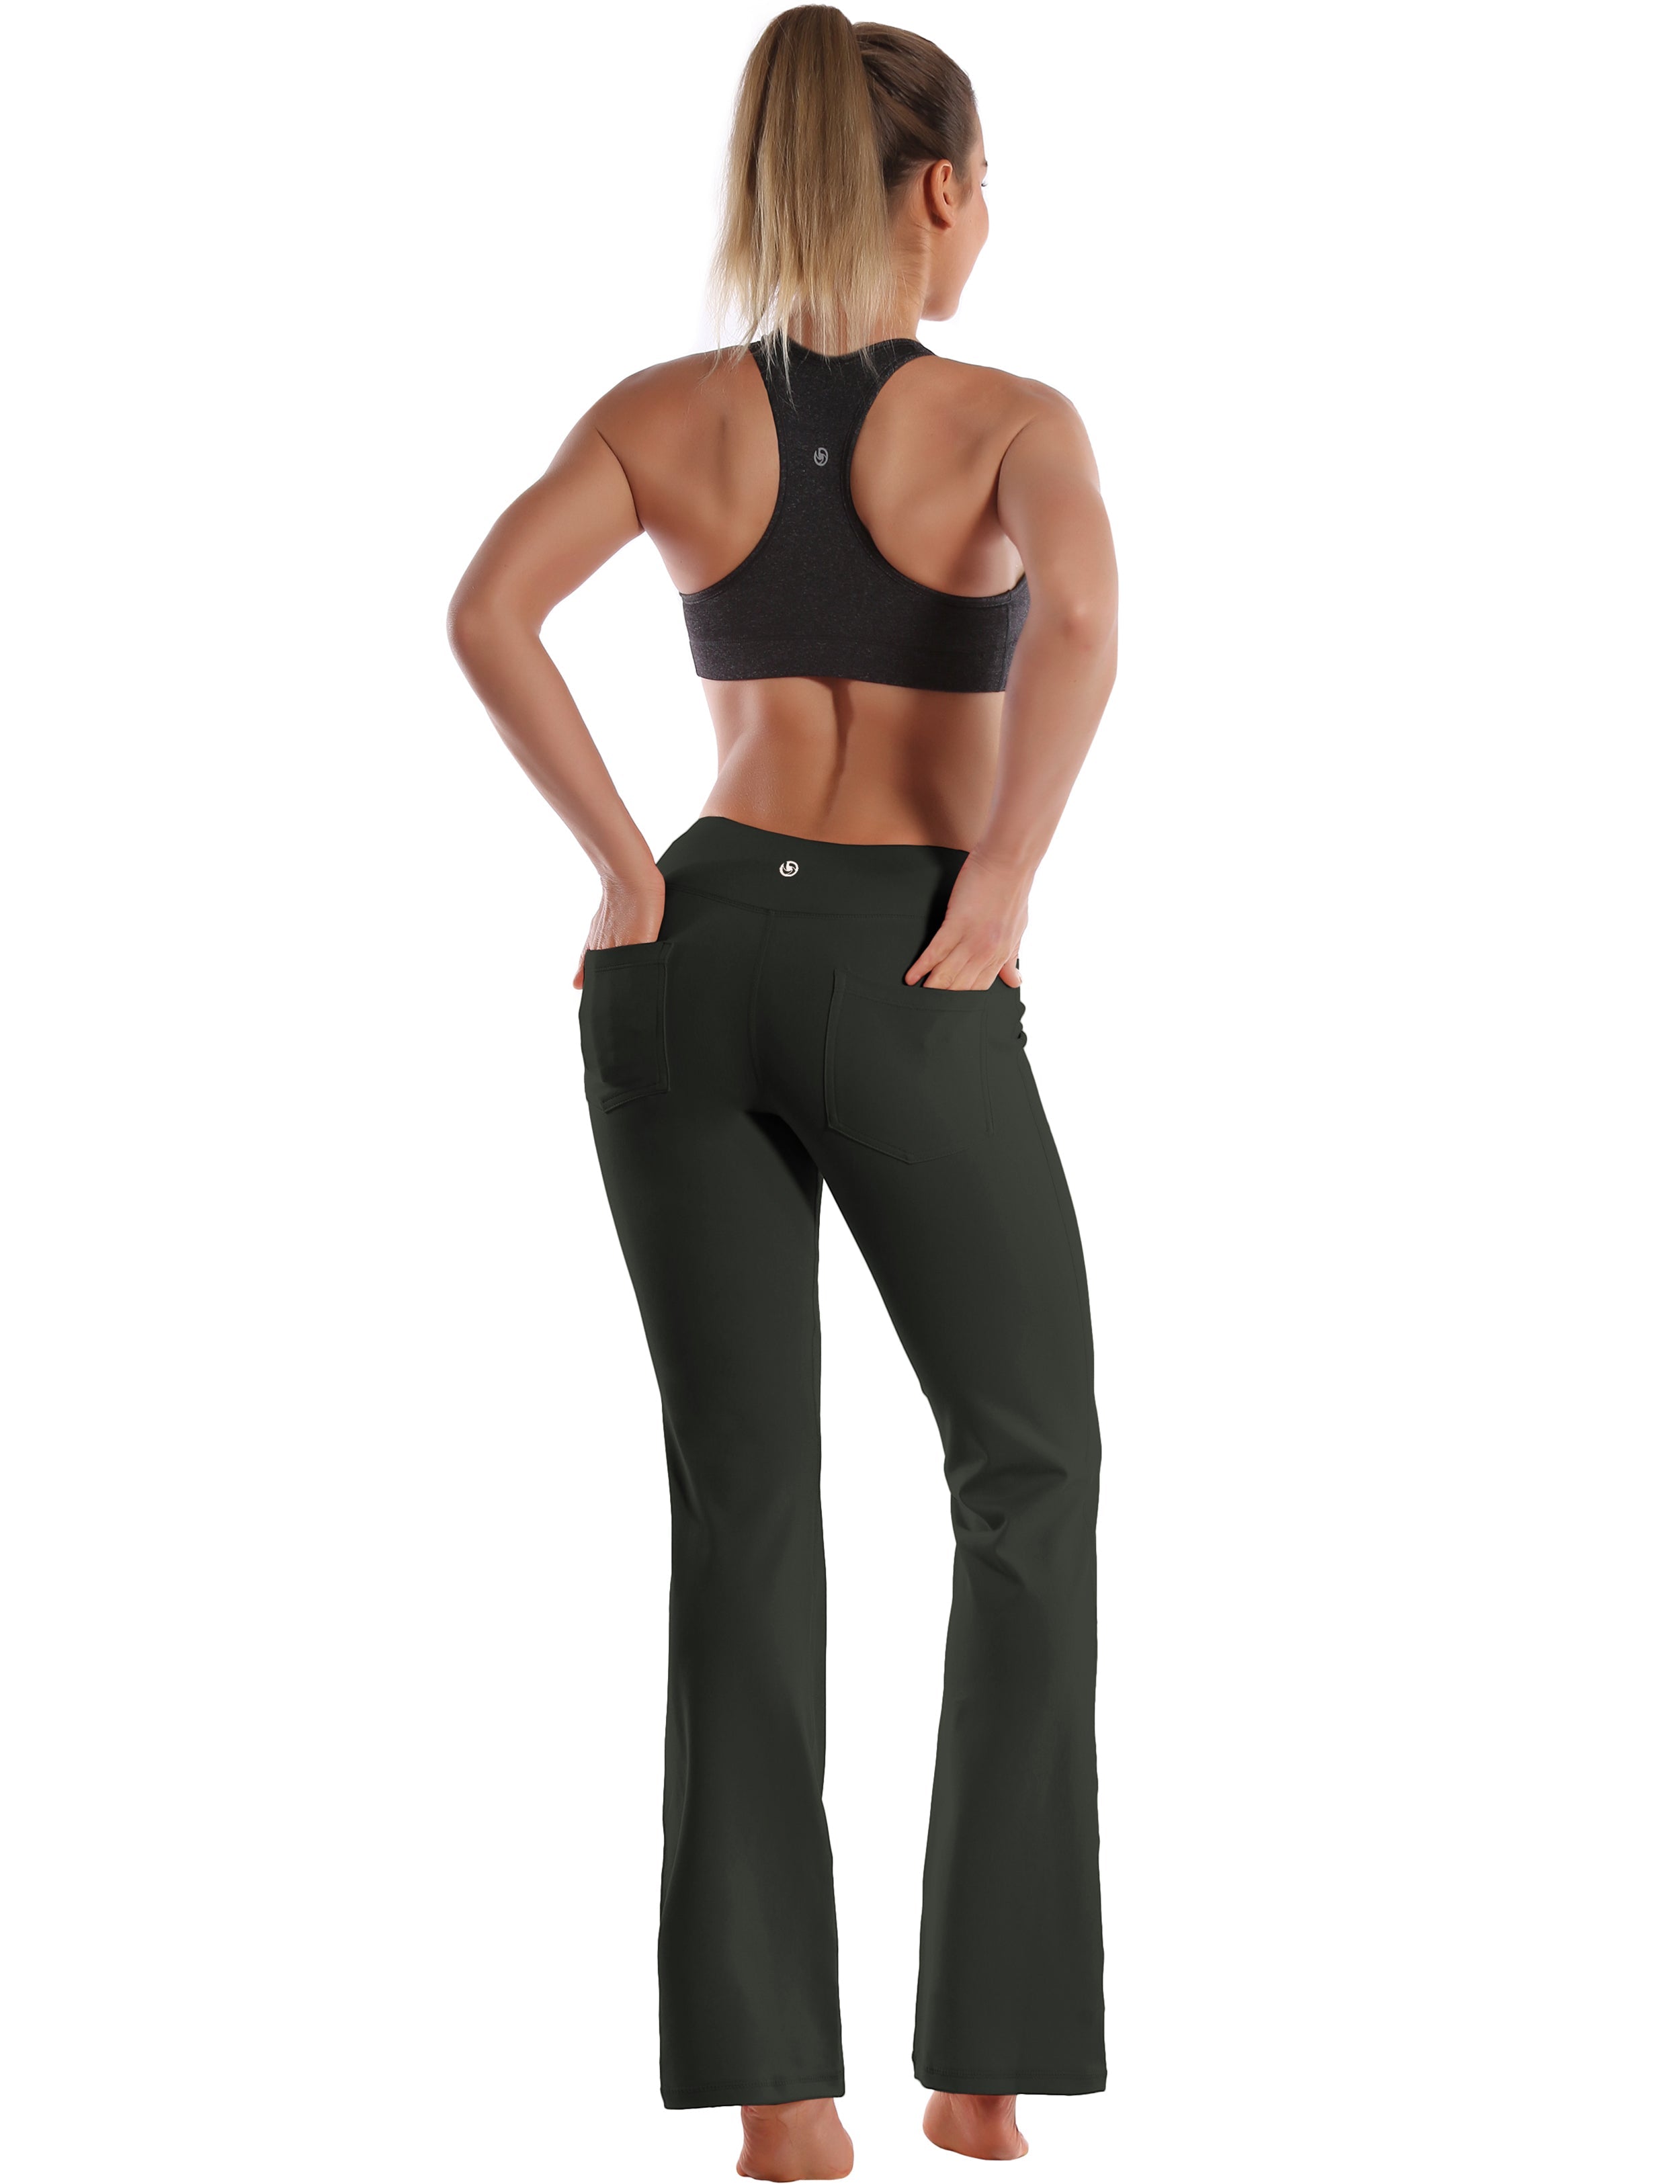 Back Pockets Bootcut Leggings olivegray 87%Nylon/13%Spandex Fabric doesn't attract lint easily 4-way stretch No see-through Moisture-wicking Inner pocket Four lengths